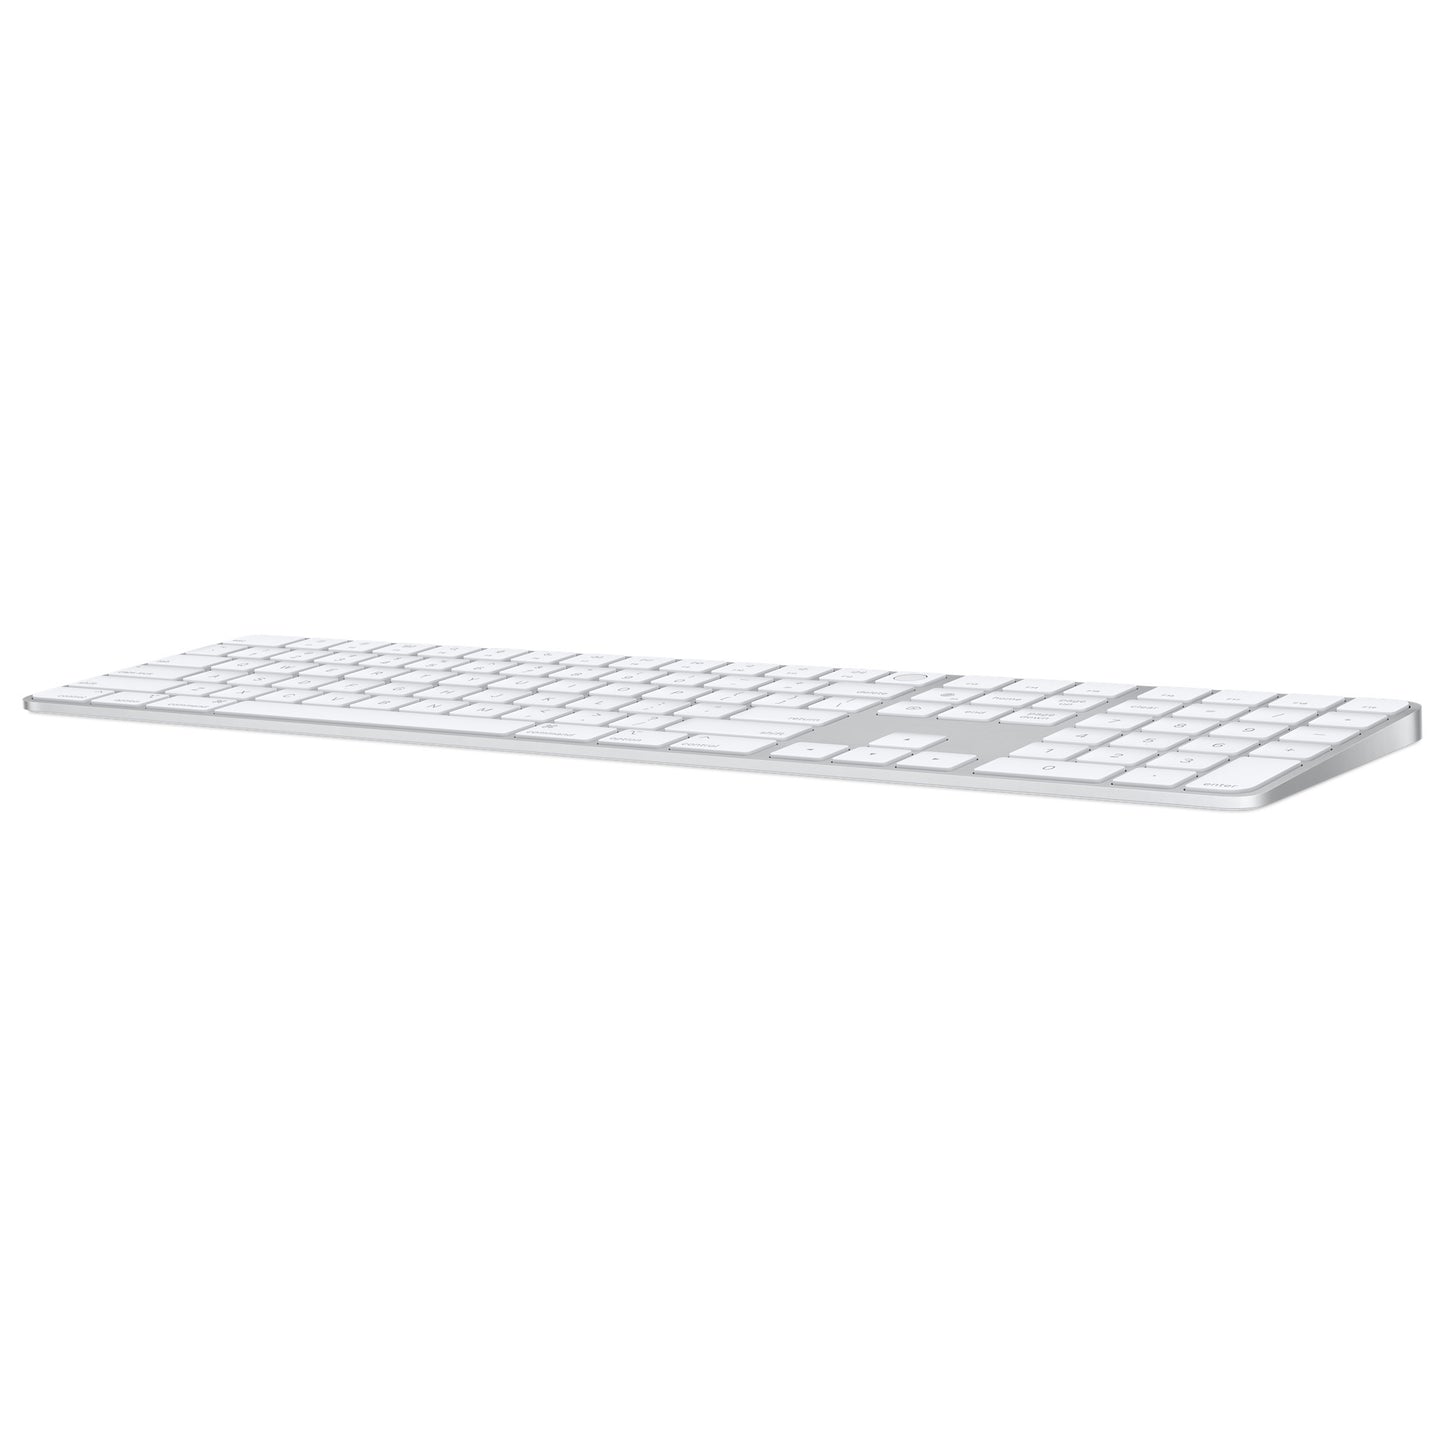 Magic Keyboard with Touch ID and Numeric Keypad for Mac computers with Apple silicon - International English